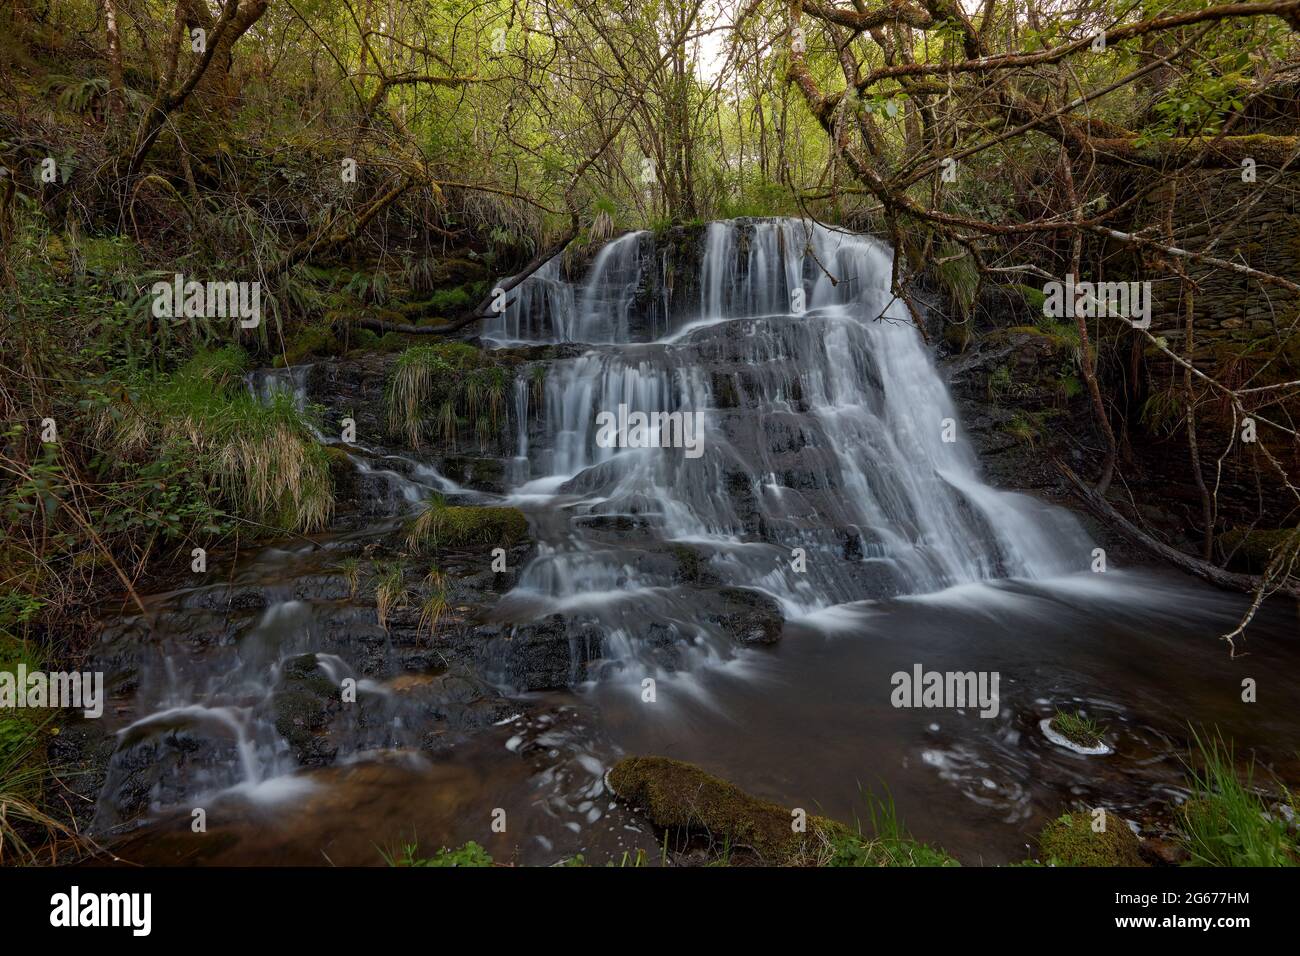 Waterfall in a beautiful forest in the area of Galicia, Spain. Stock Photo